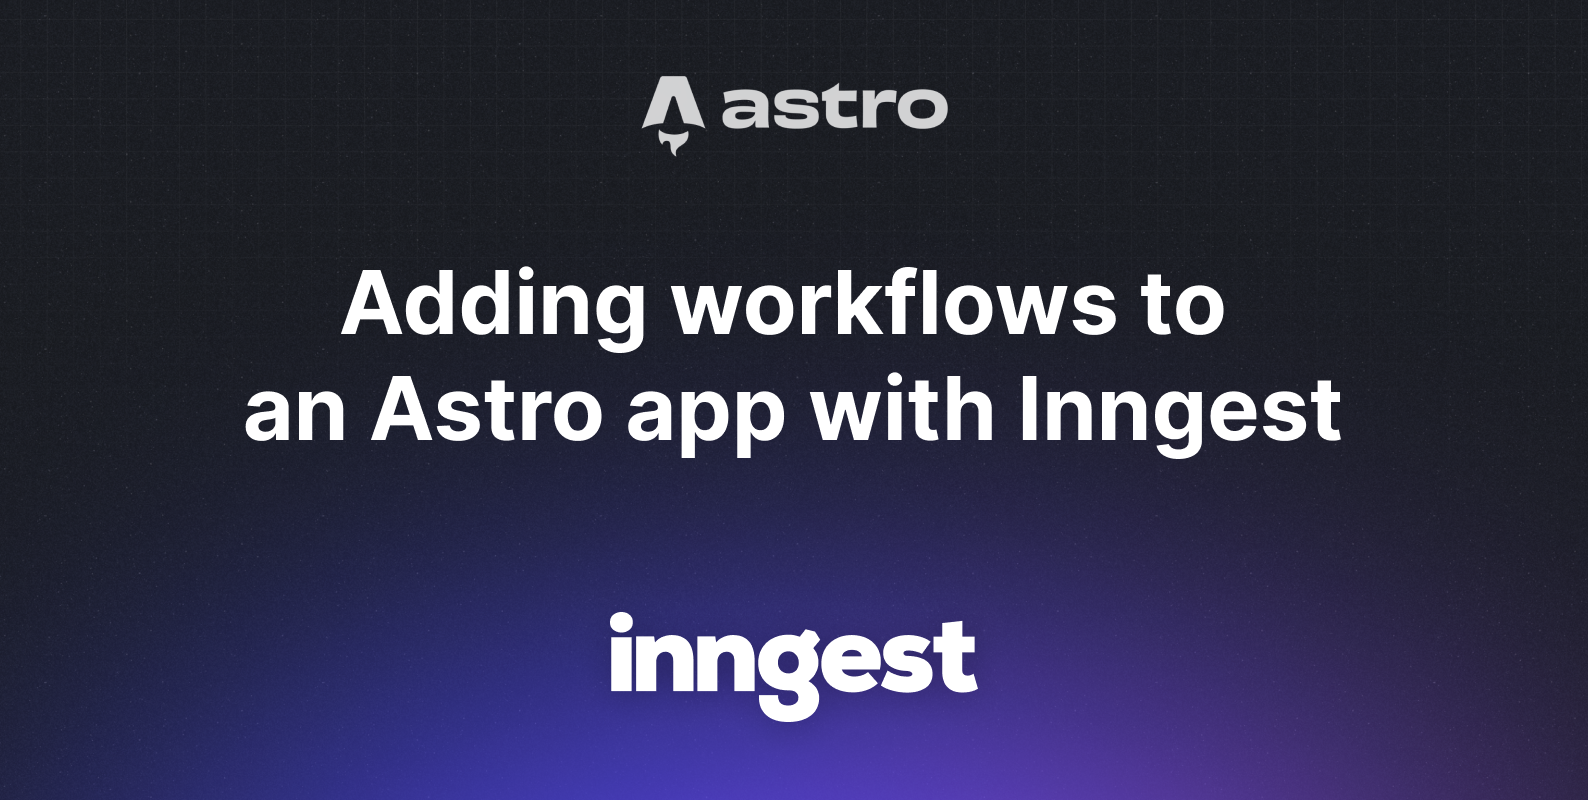 Featured image for Adding workflows to an Astro app with Inngest blog post